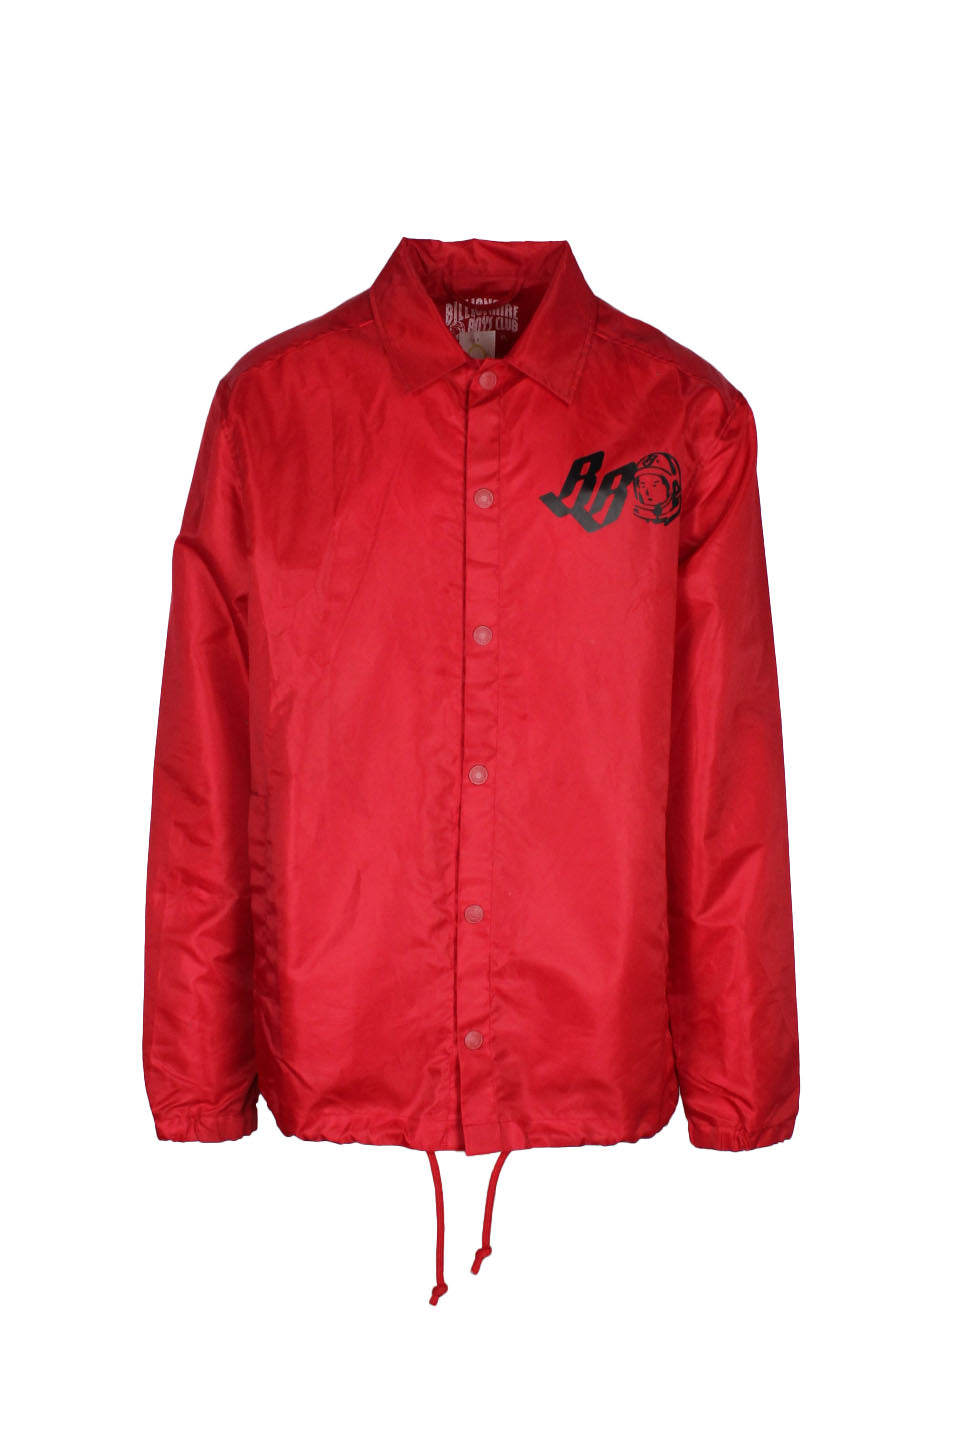 front view of billionaire boys club red snap button up coach jacket. features ‘bb’ graphic printed at left breast, ‘billionaire boys club’ graphic printed at back, side hand pockets, elastic at cuffs, and drawstrings at hem.